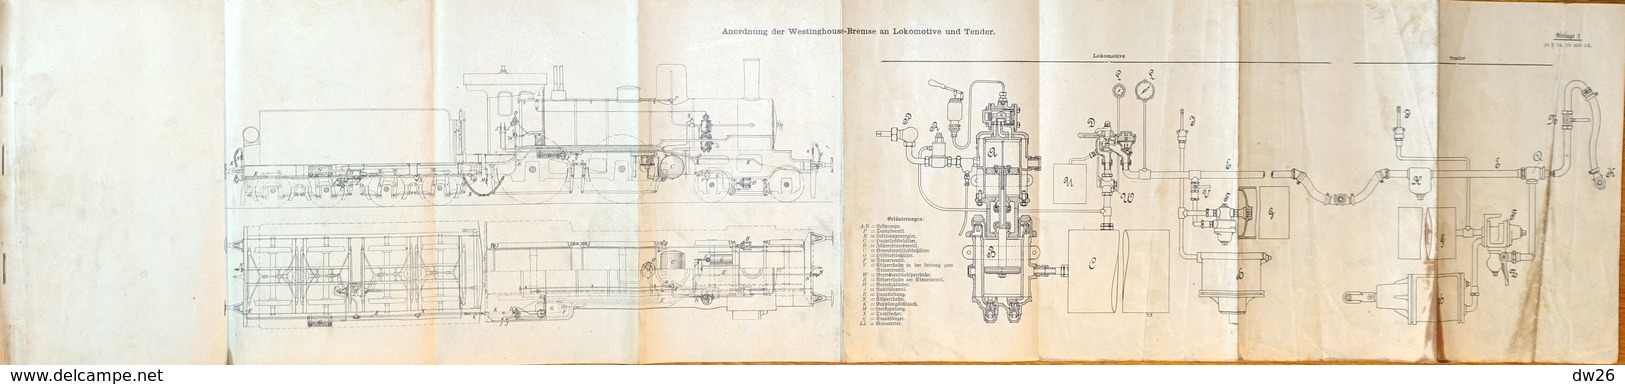 Planches Techniques Train (locomotives): Anordnung Der Westinghouse-Bremse And Lokomotive Und Tender - Technical